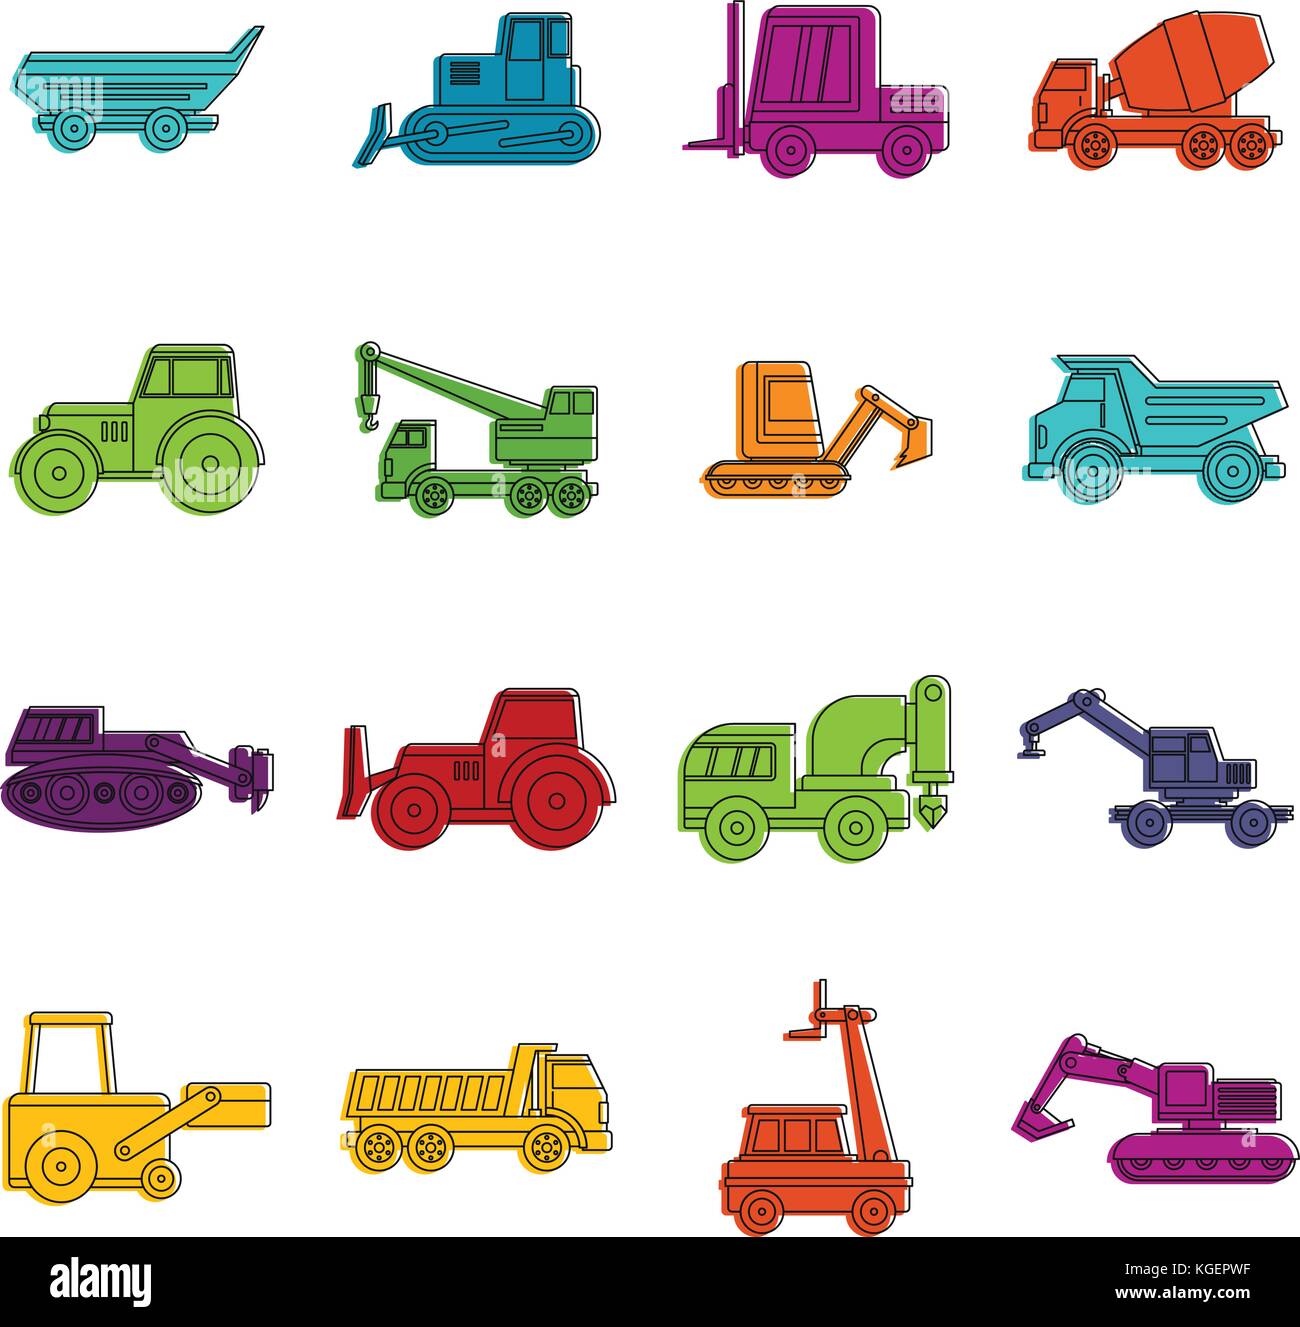 Building vehicles icons doodle set Stock Vector